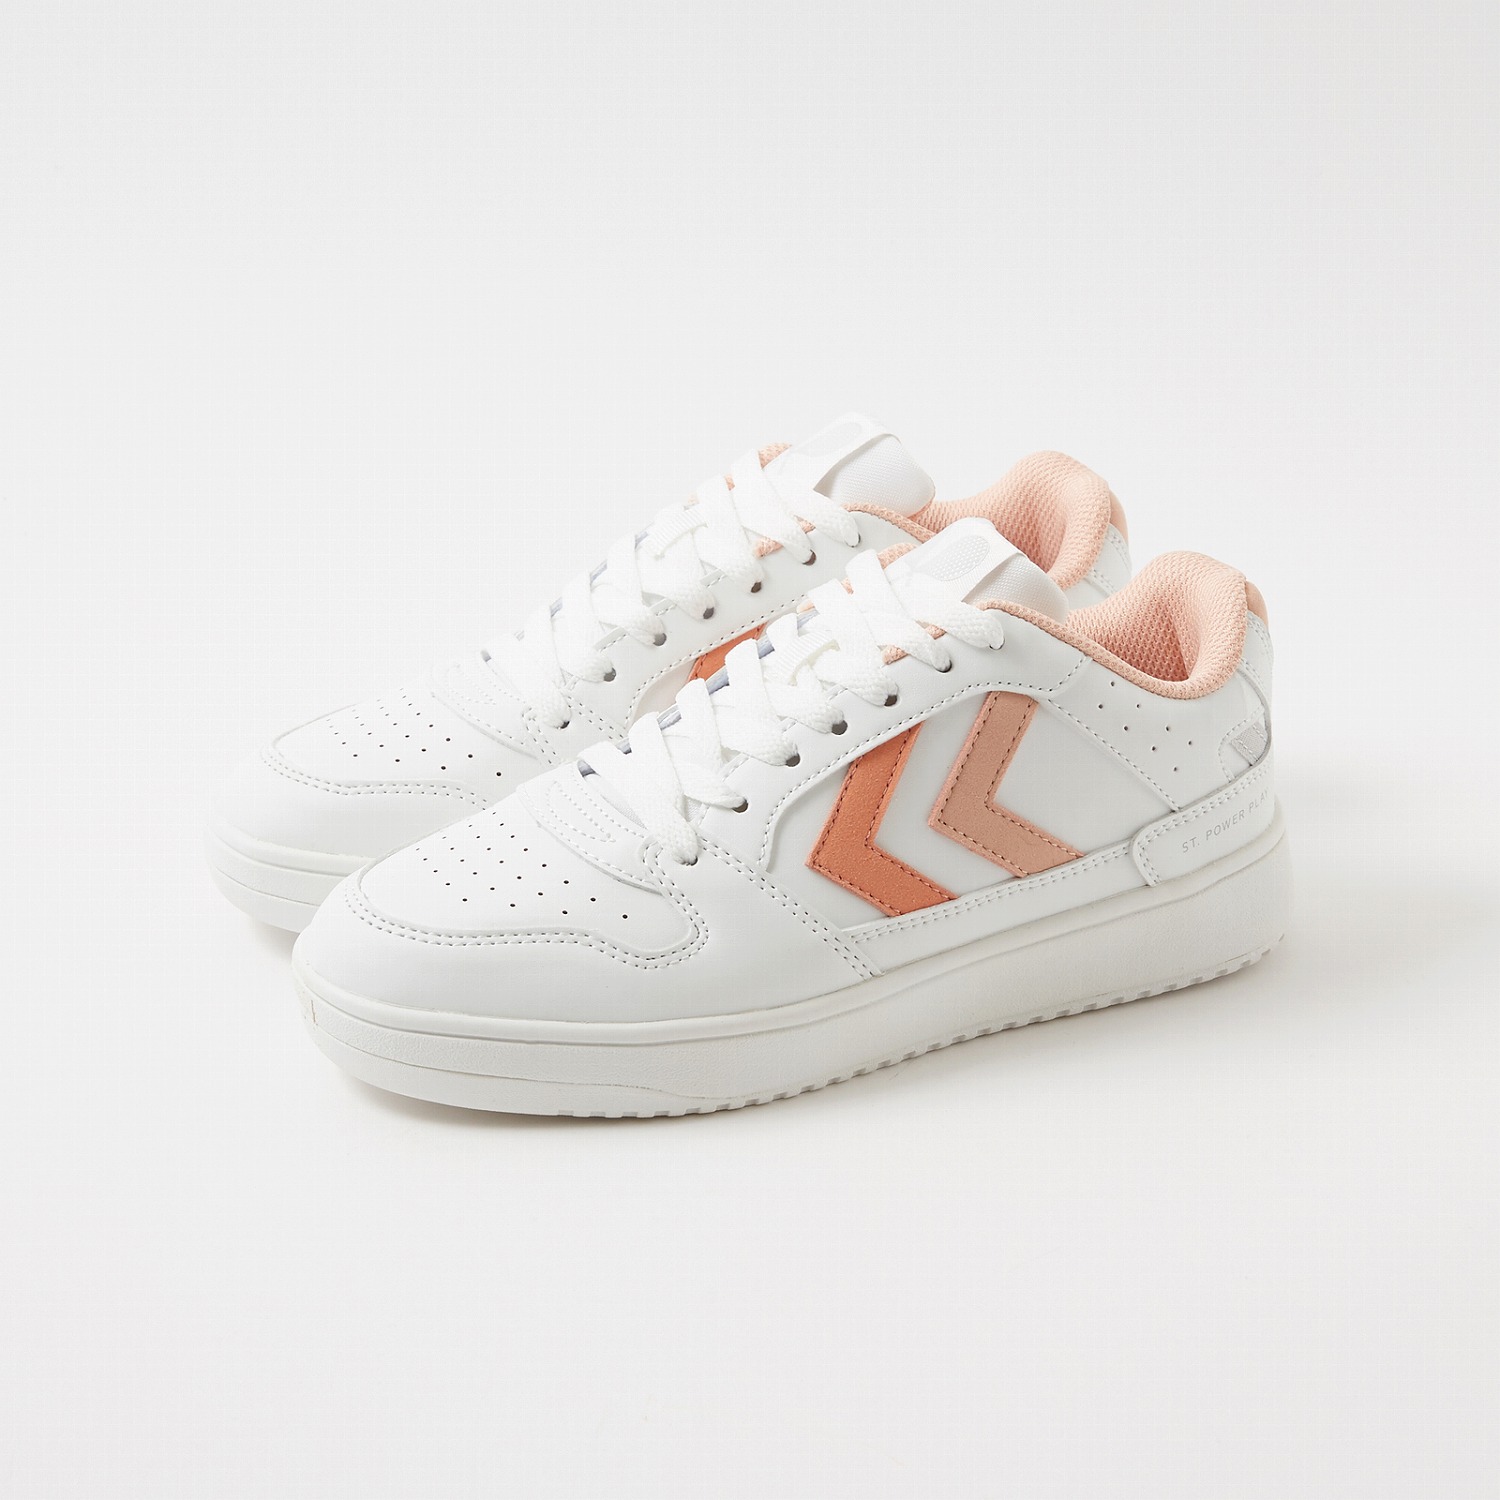 hummel(ヒュンメル)-S ST. POWER PLAY WMNS WHITE/ALMOST APRICOT 